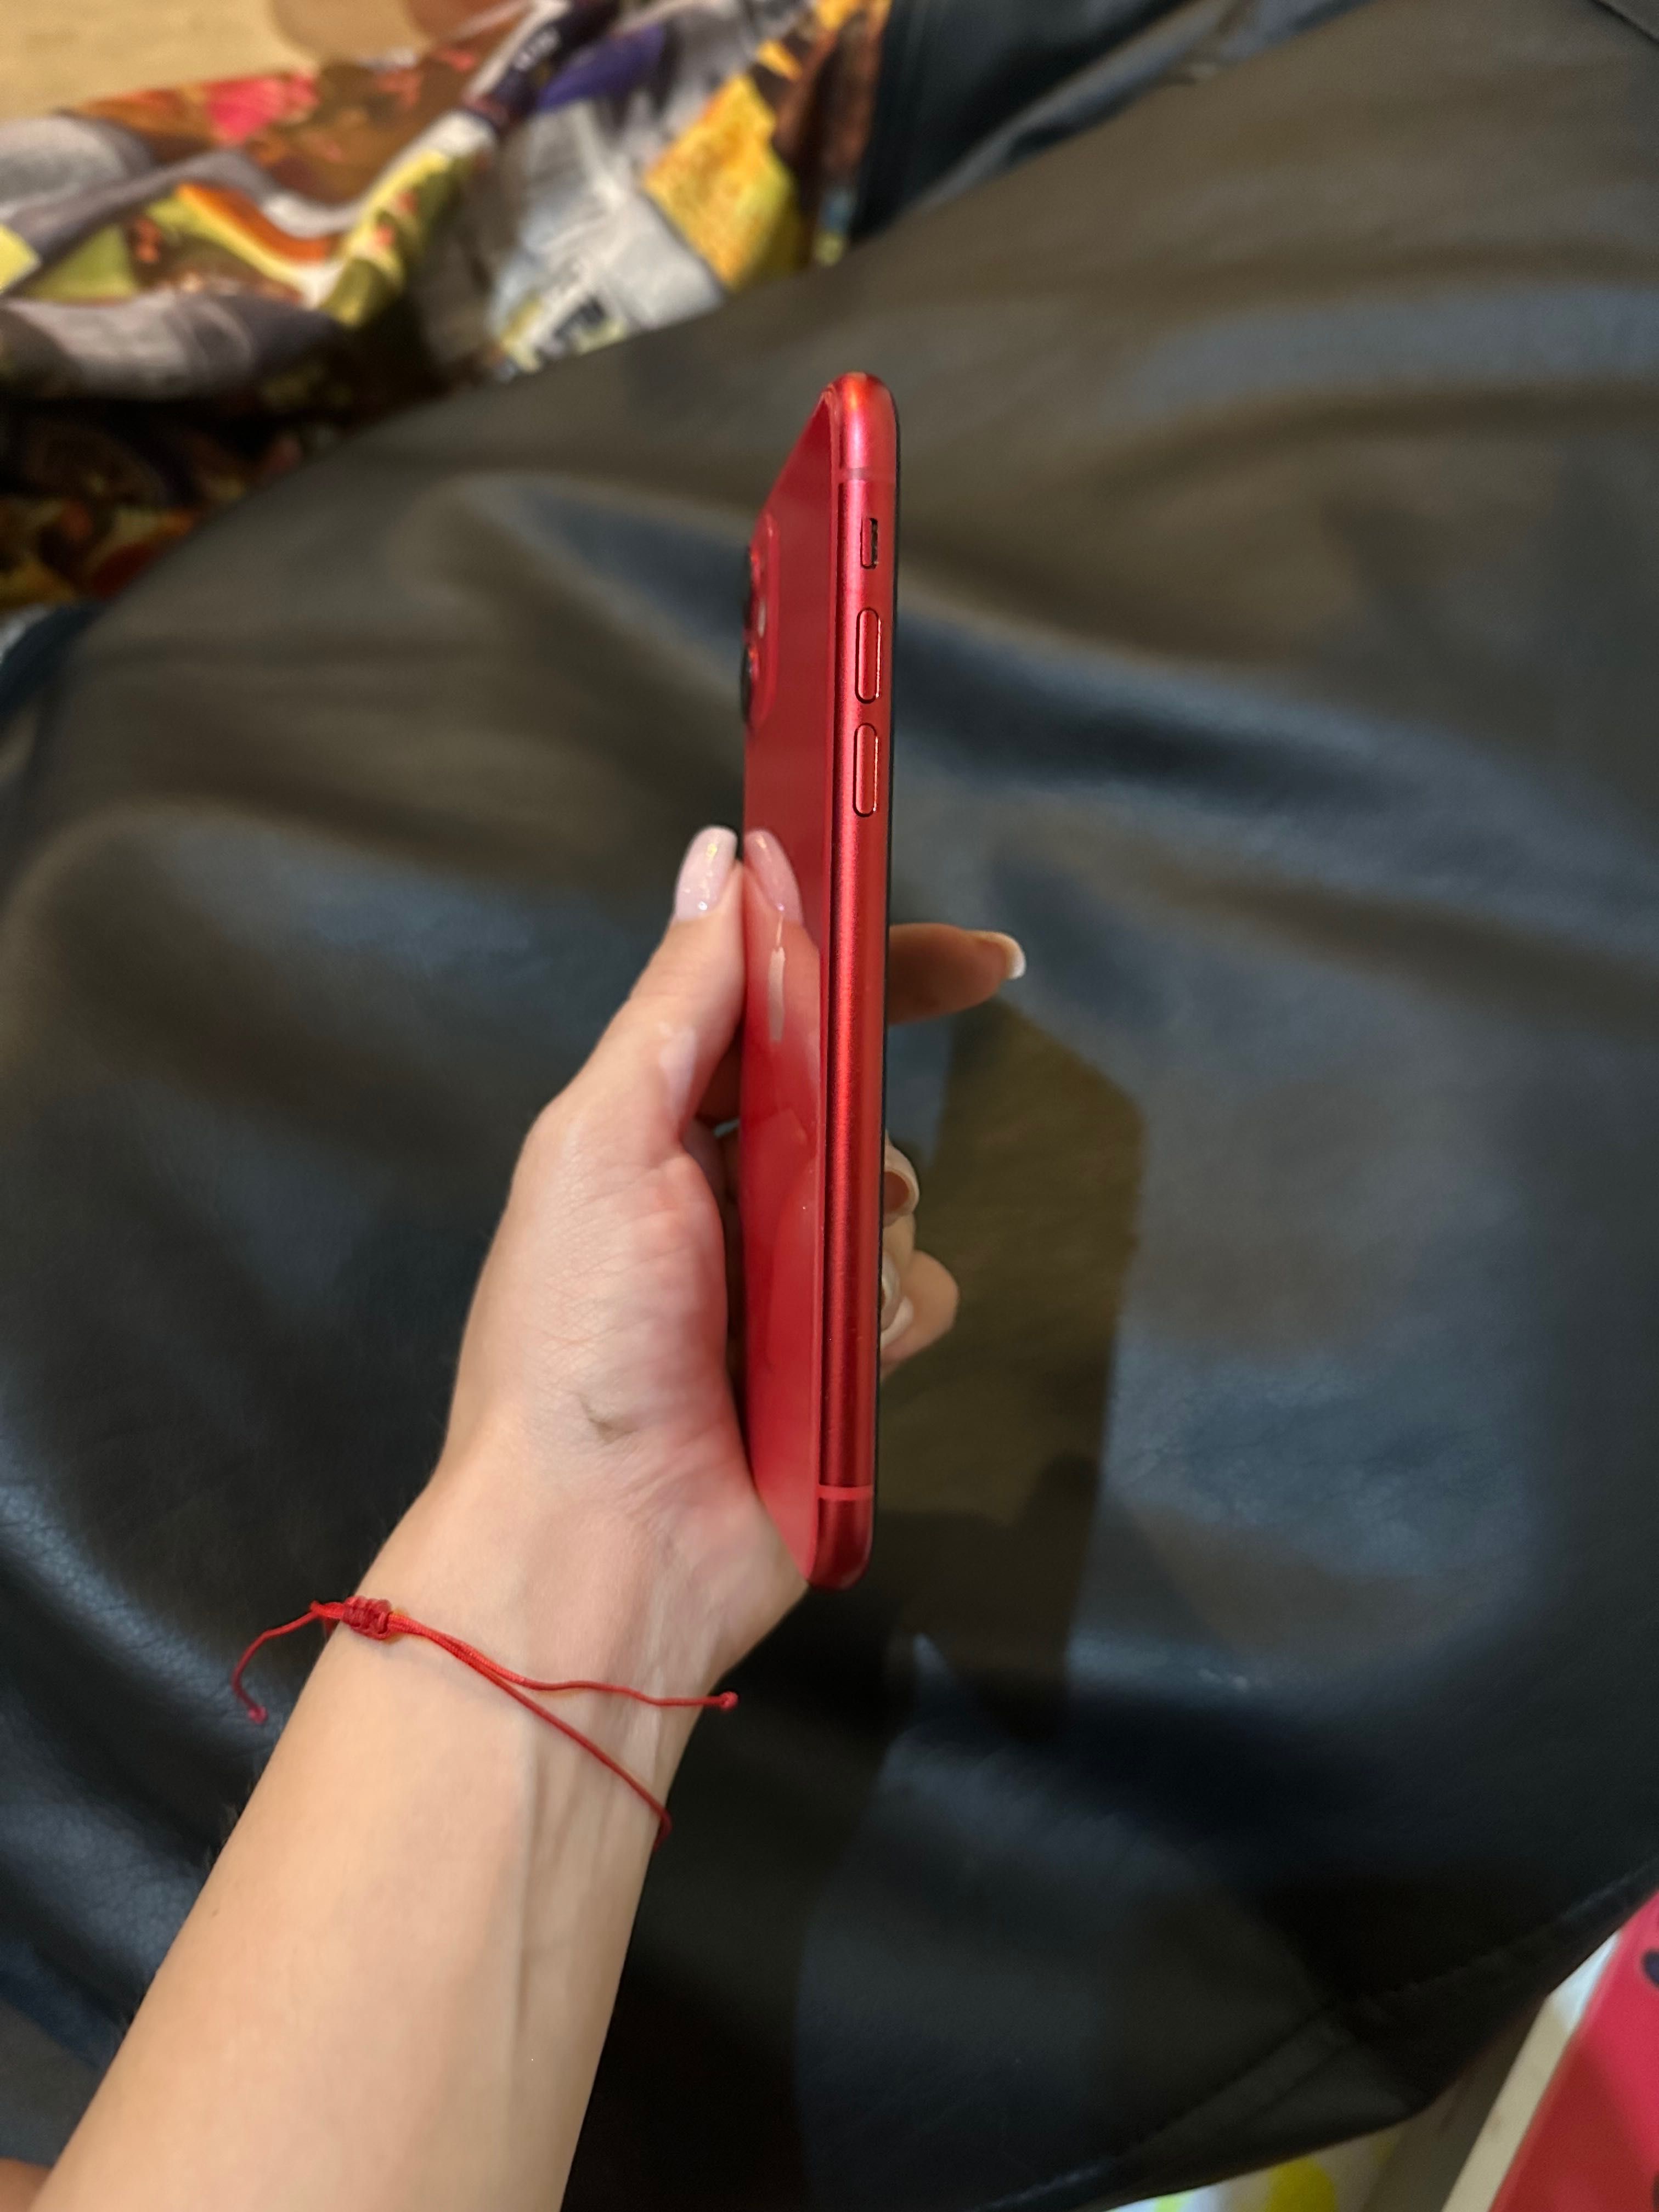 iPhone 11 red, 128 гб